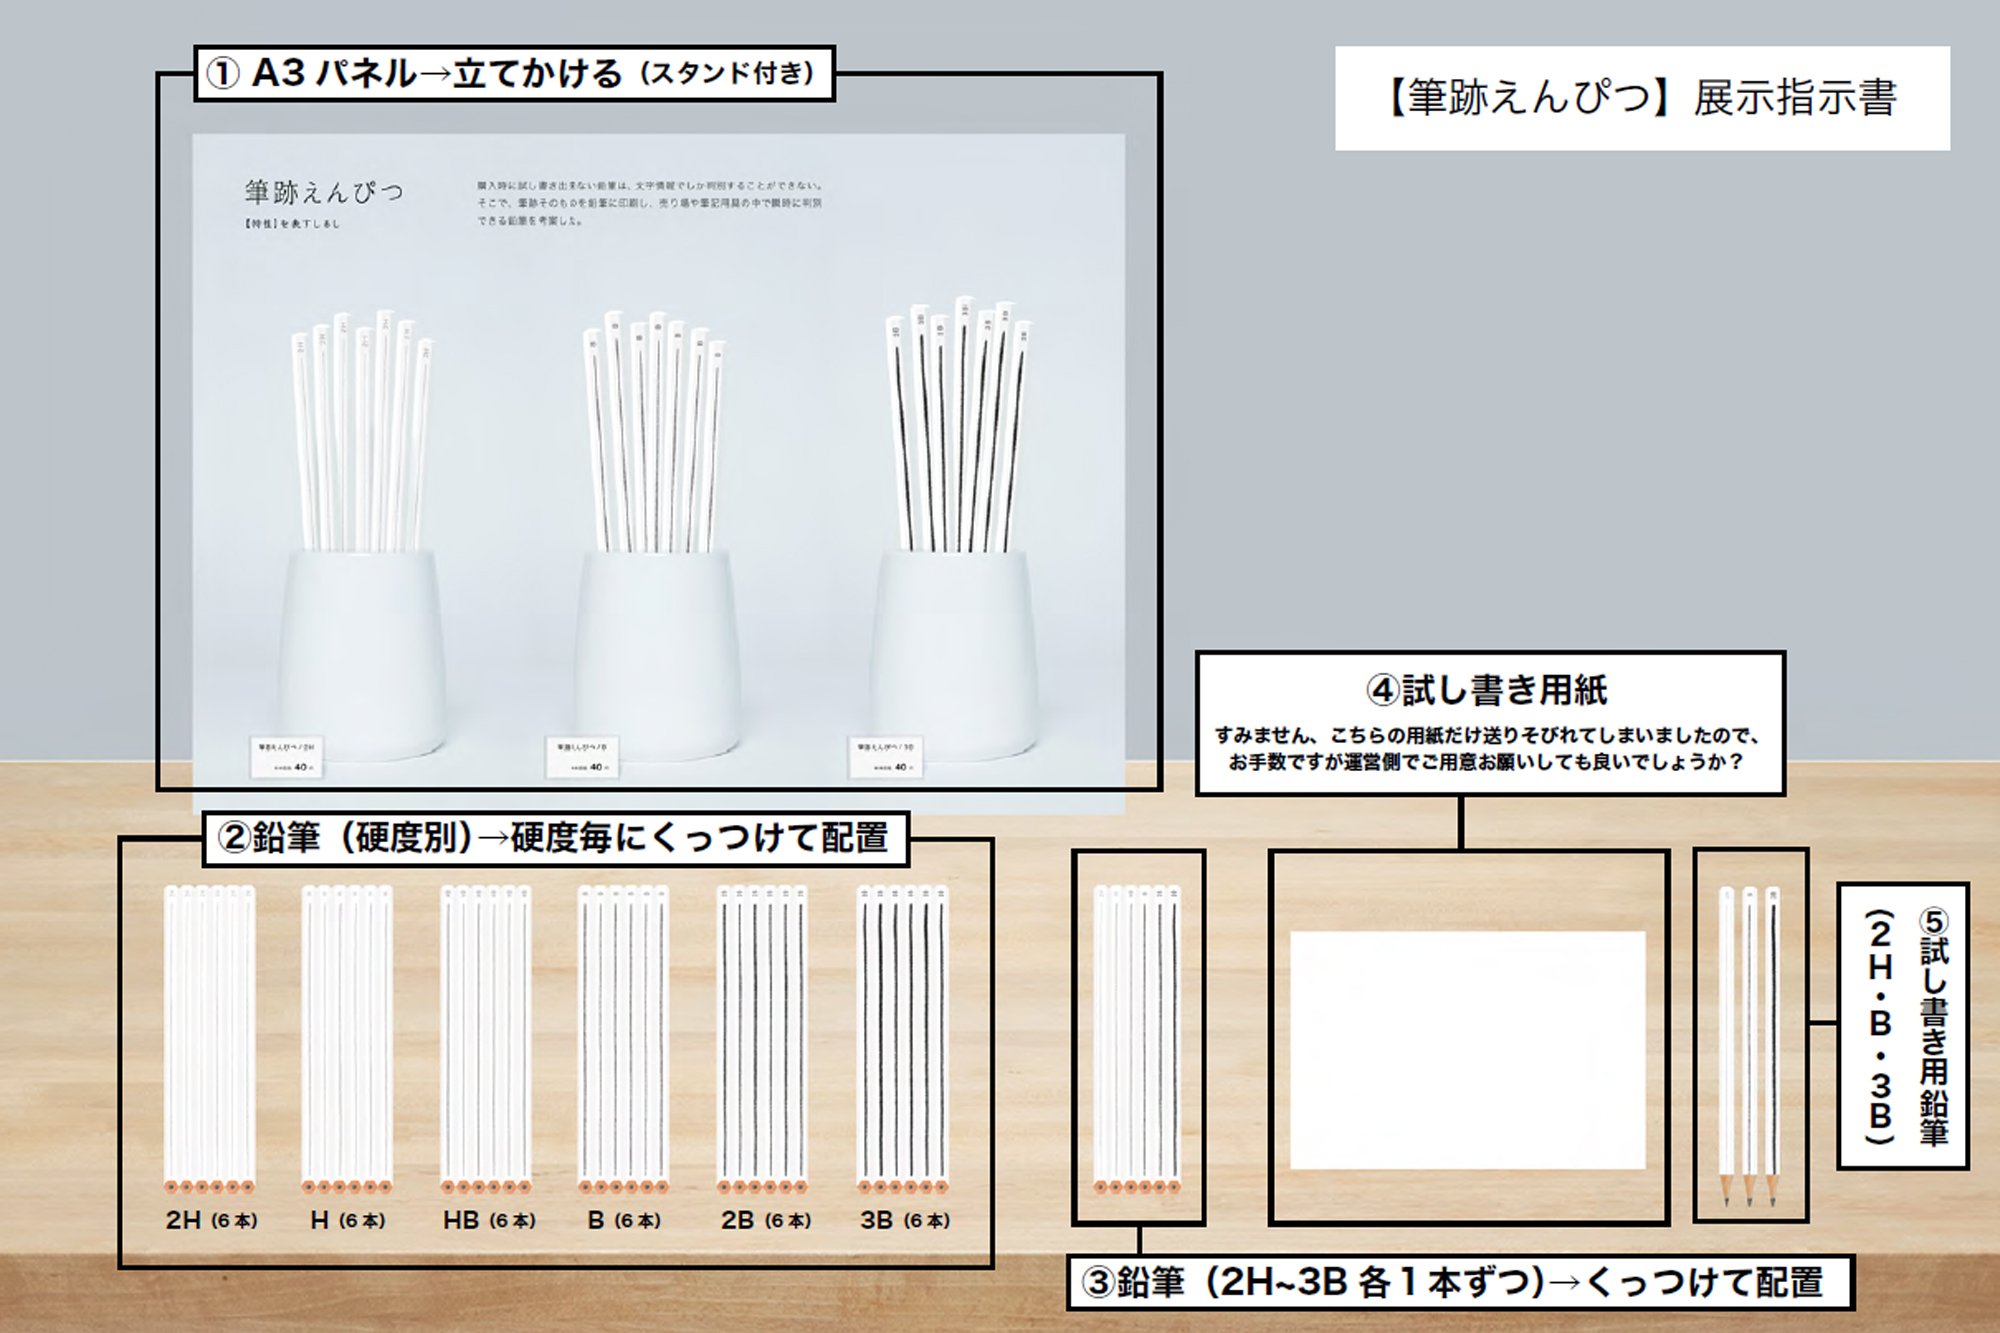 14th SHACHIHATA New Product Design Competition（第14回シヤチハタ・ニュープロダクト・デザインコンペティション）　審査員賞　原賞「筆跡えんぴつ」展示指示書